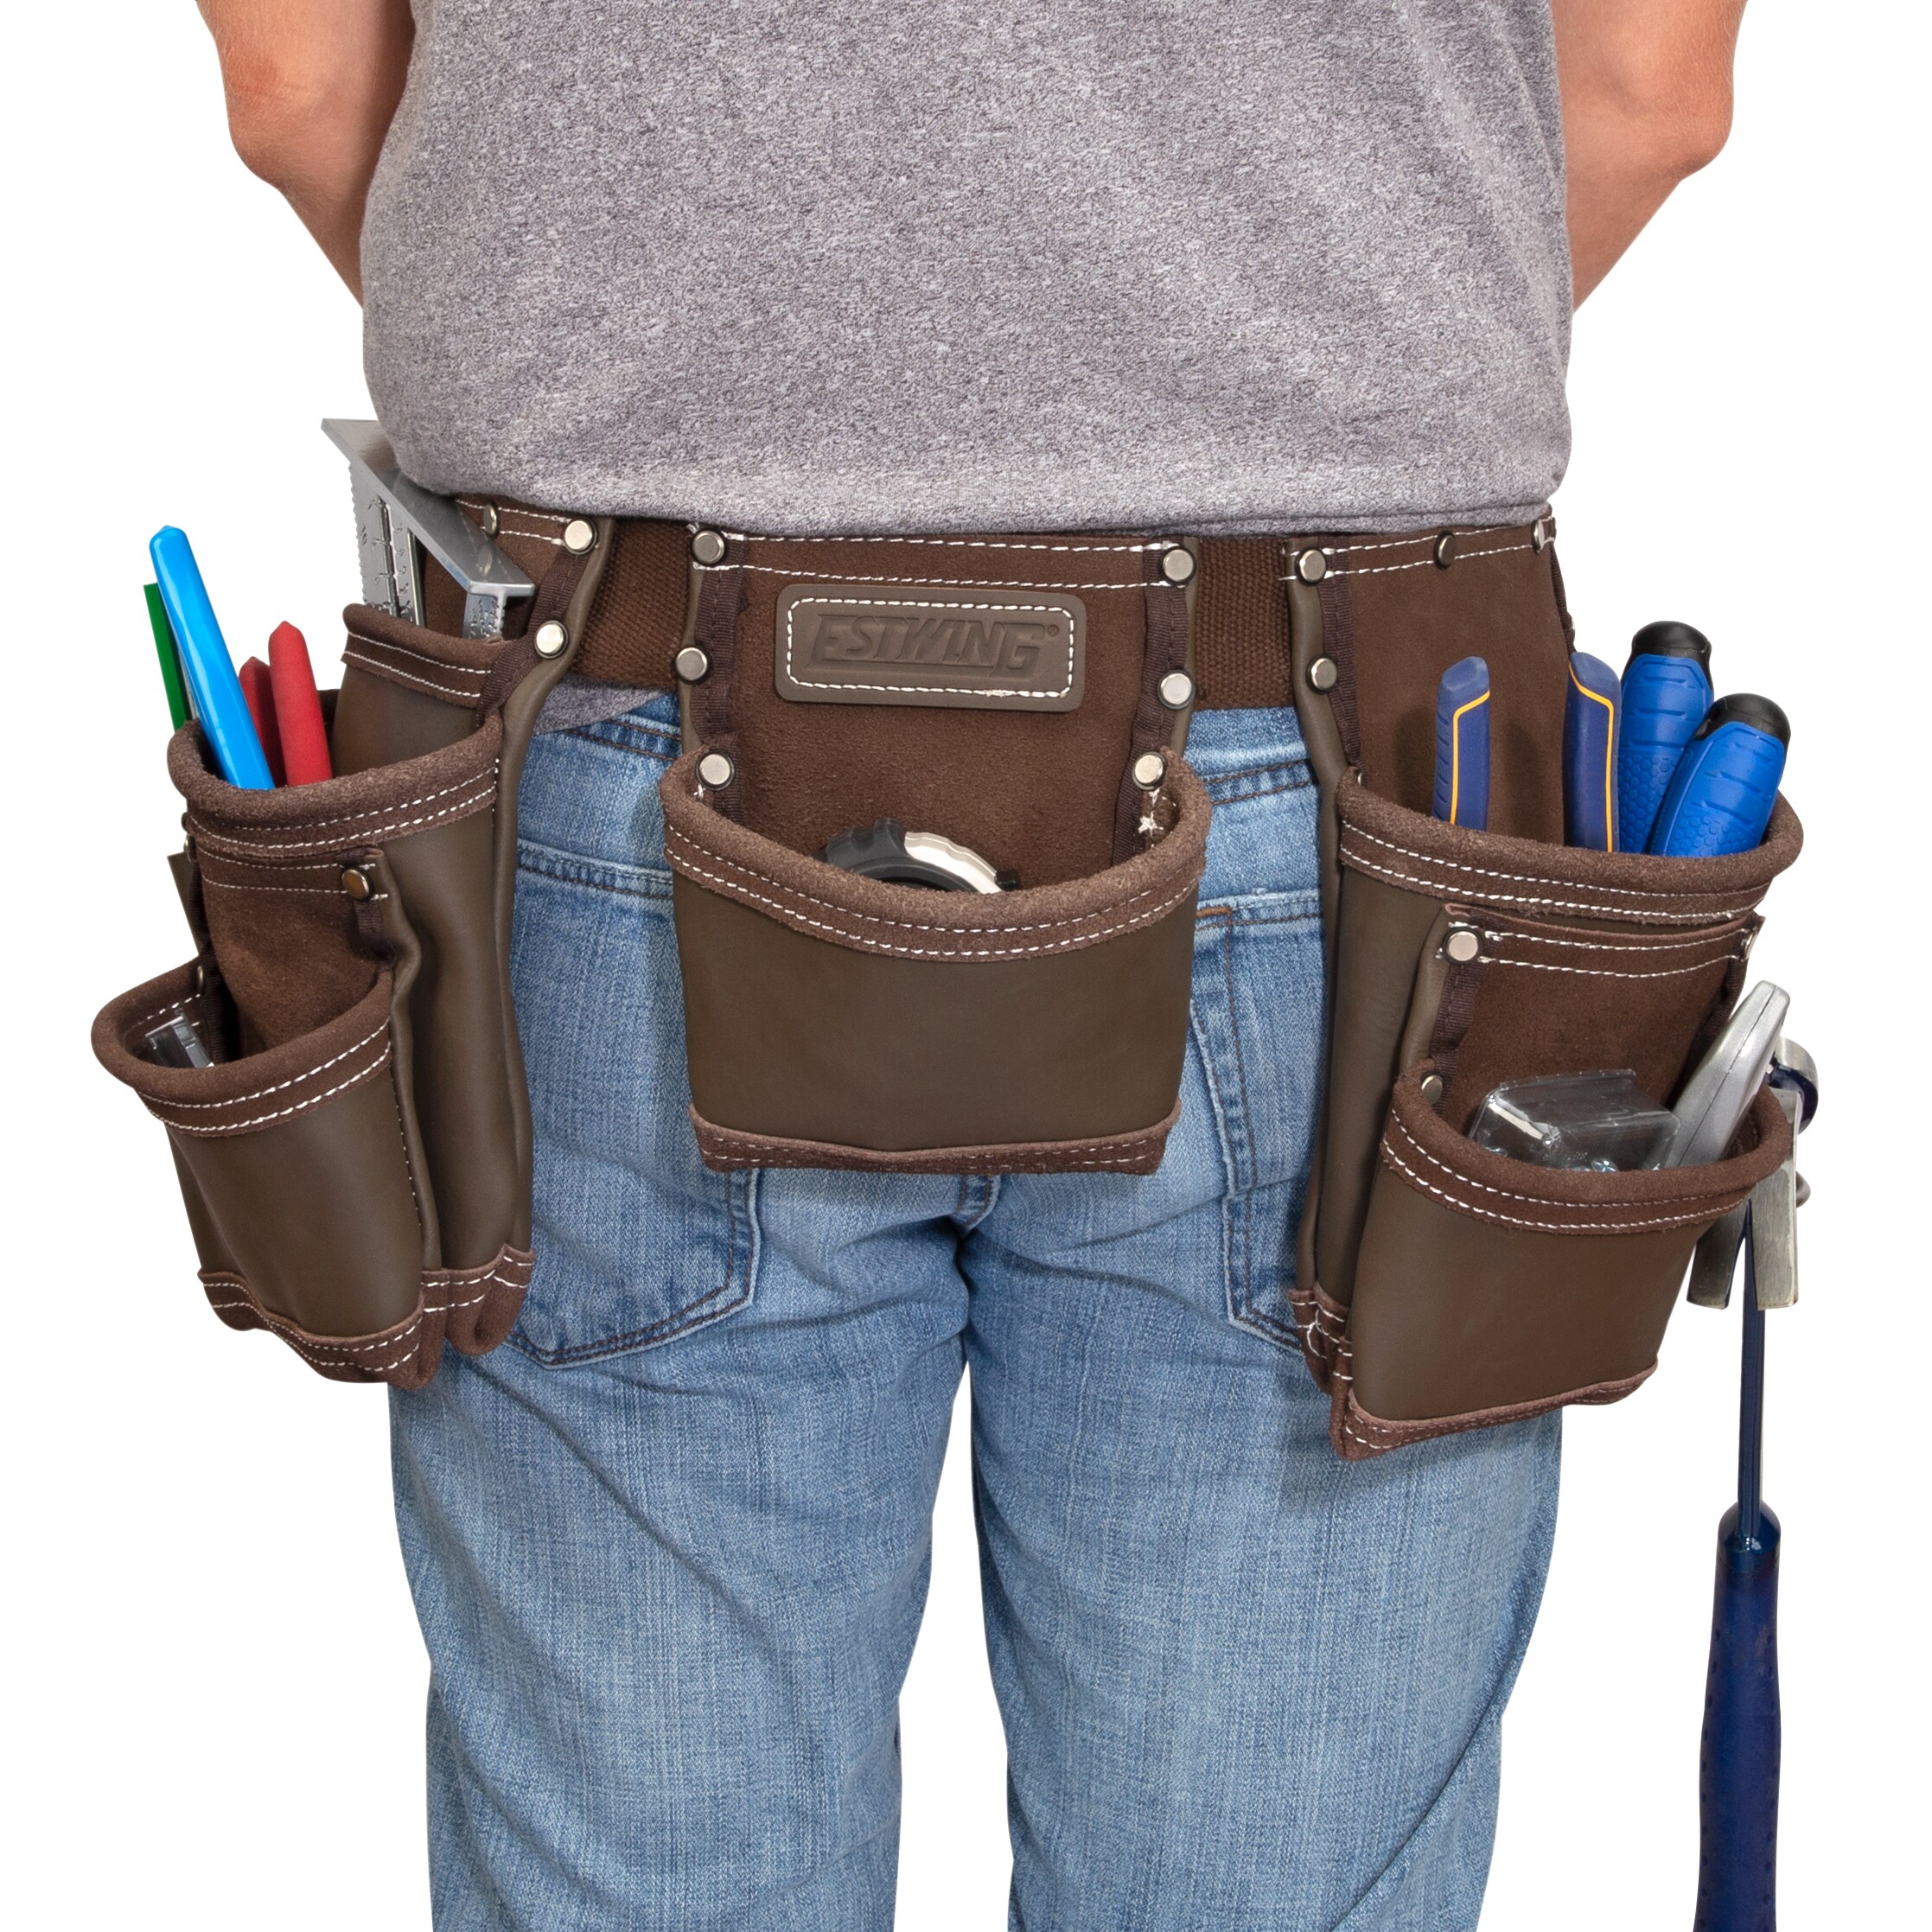 Estwing General Construction Leather Tool Apron at Lowes.com